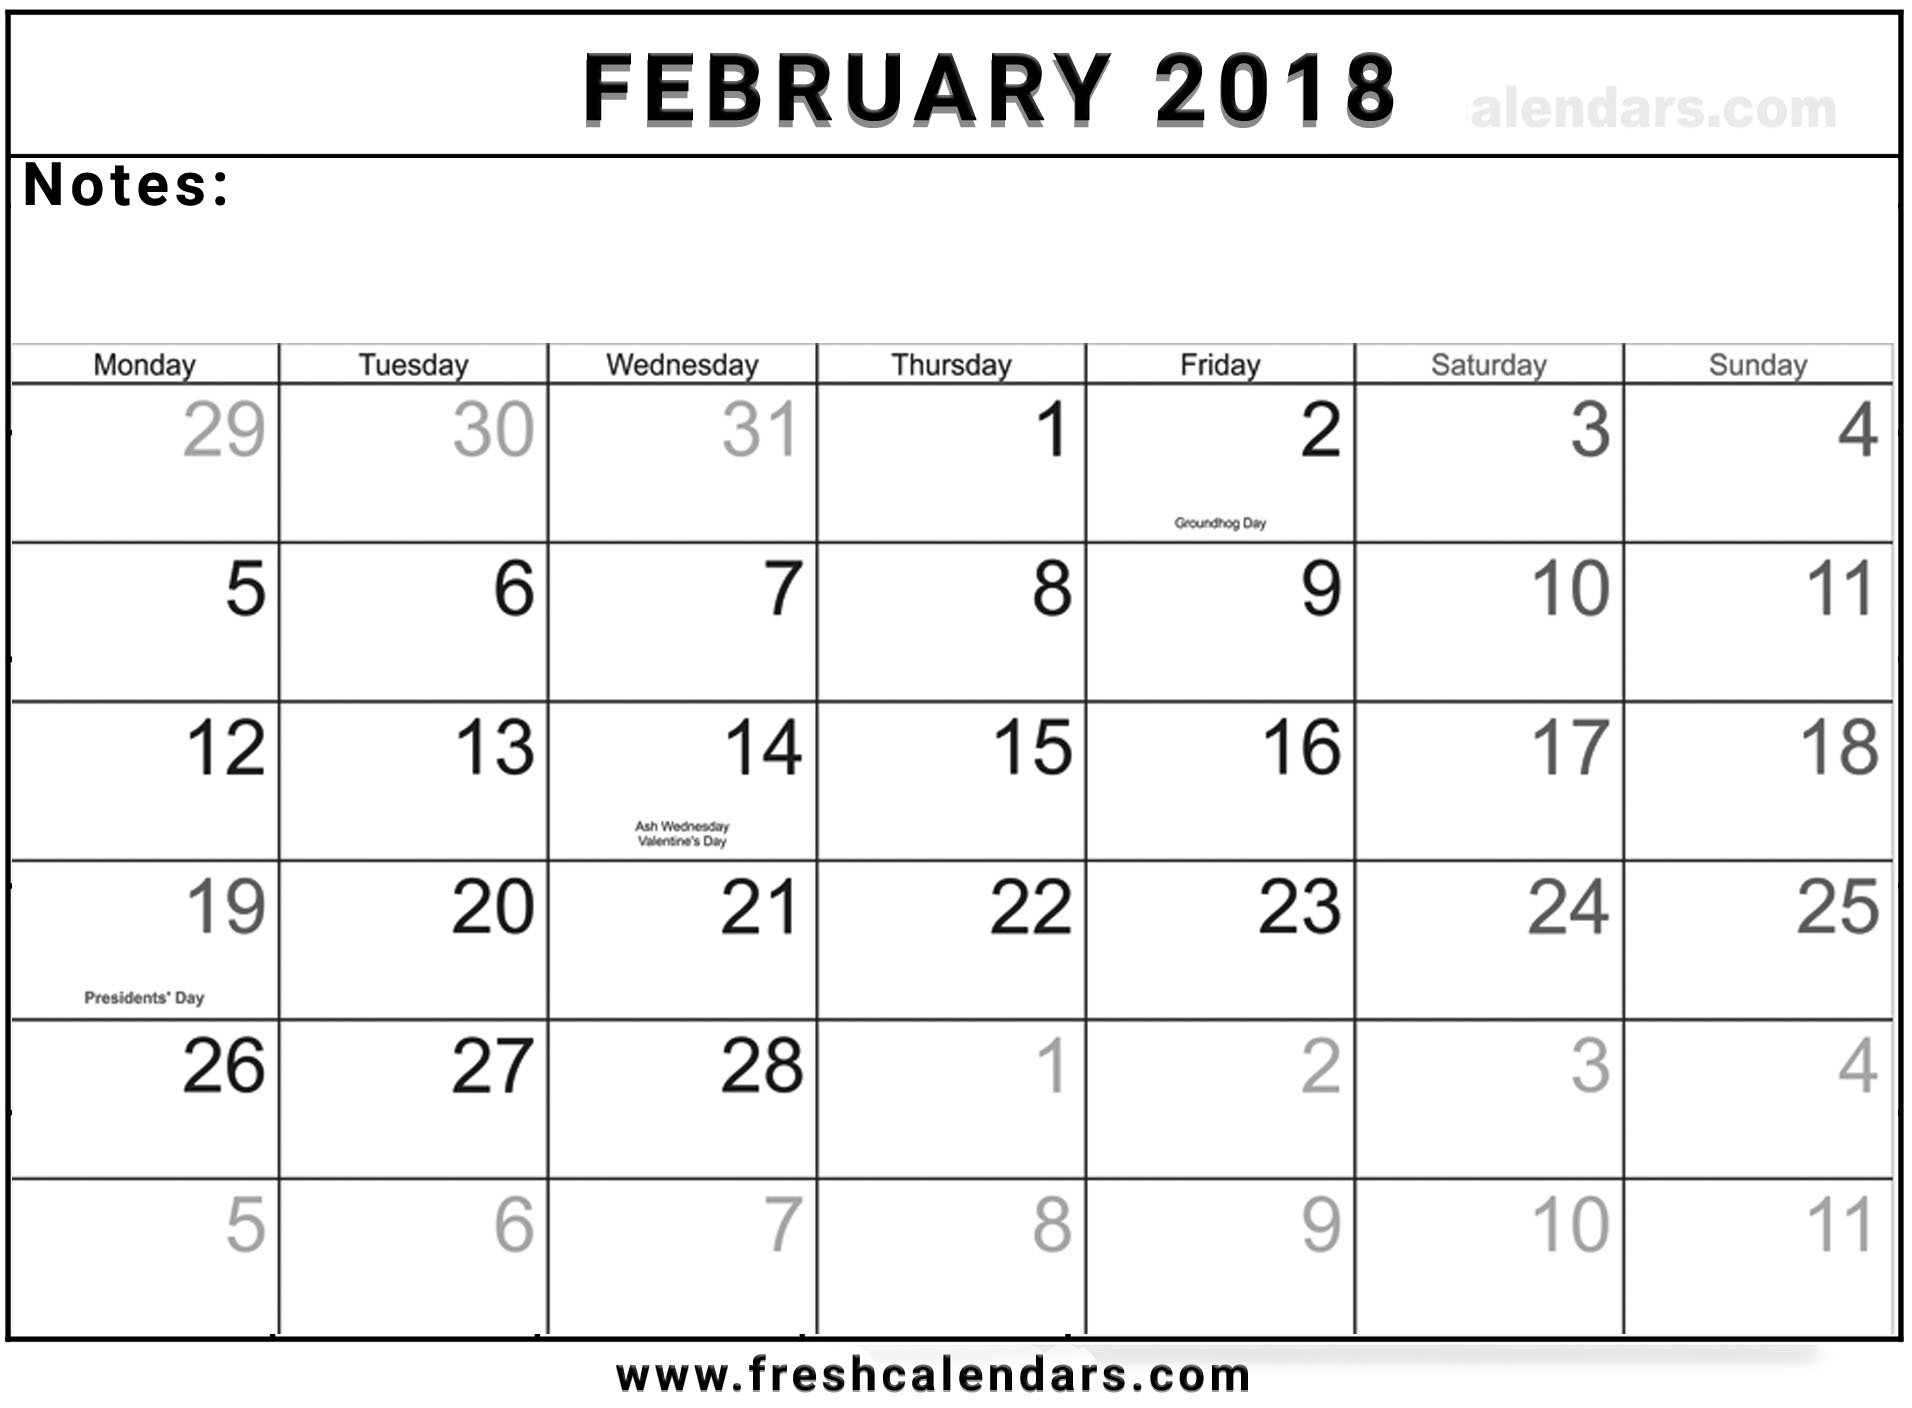 February 2018 Calendar With Holidays and Notes Space